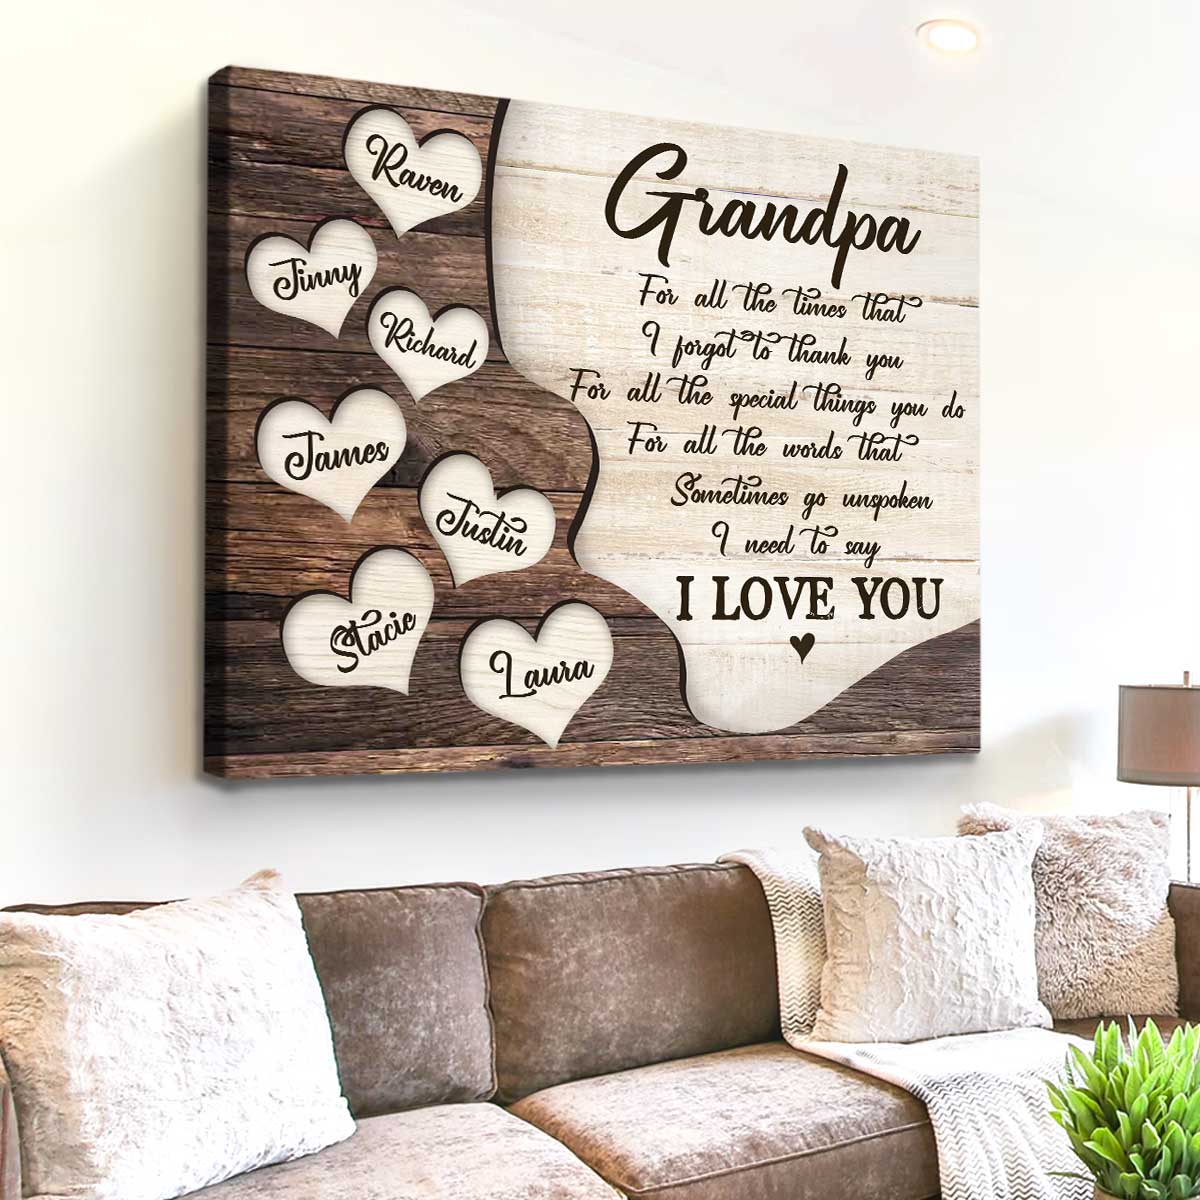 Buy Yaya Cafe Birthday Gifts for Father for Grandfather Awesome Grandpa Gift  Combo Hamper Set of 3 - Mug, Coaster, Cushion Cover Online at Lowest Price  Ever in India | Check Reviews